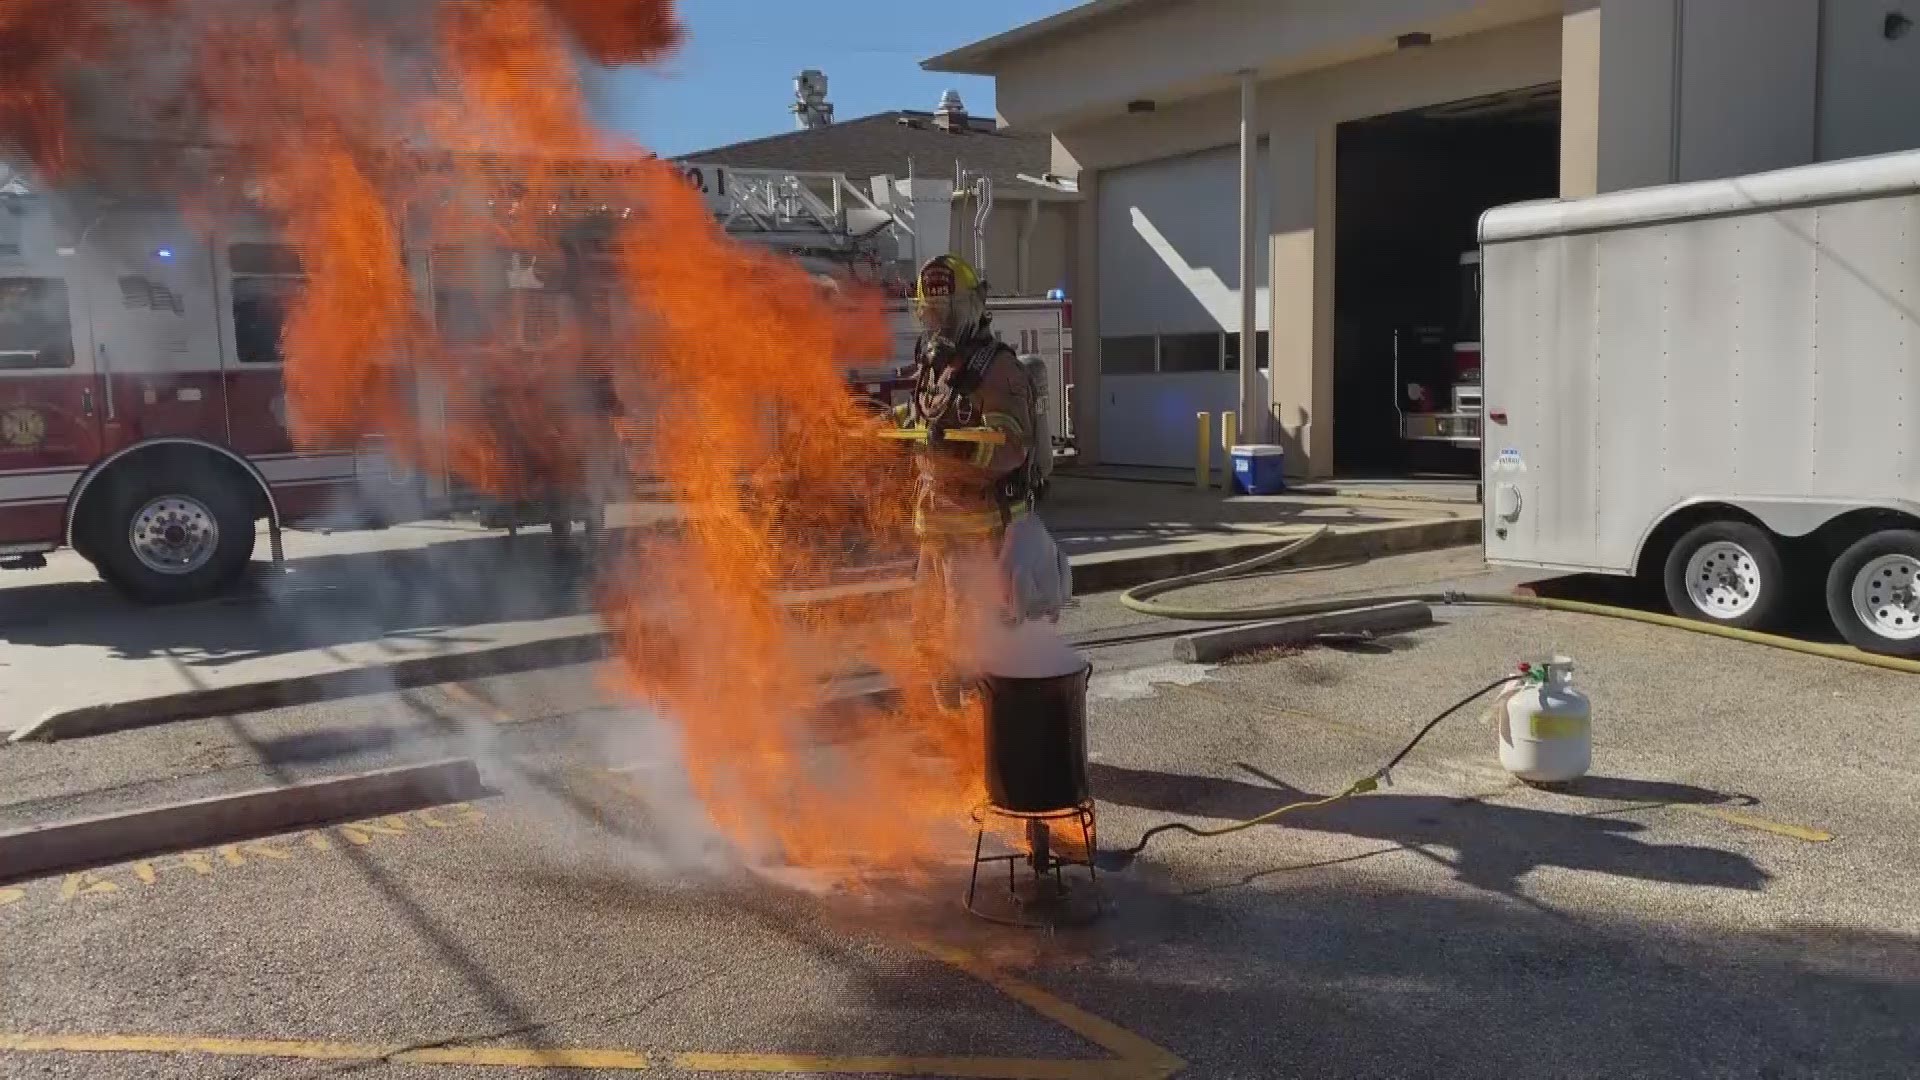 St. Tammany Parish firefighters demonstrated Saturday some of the pitfalls to avoid when frying a turkey for the holidays.